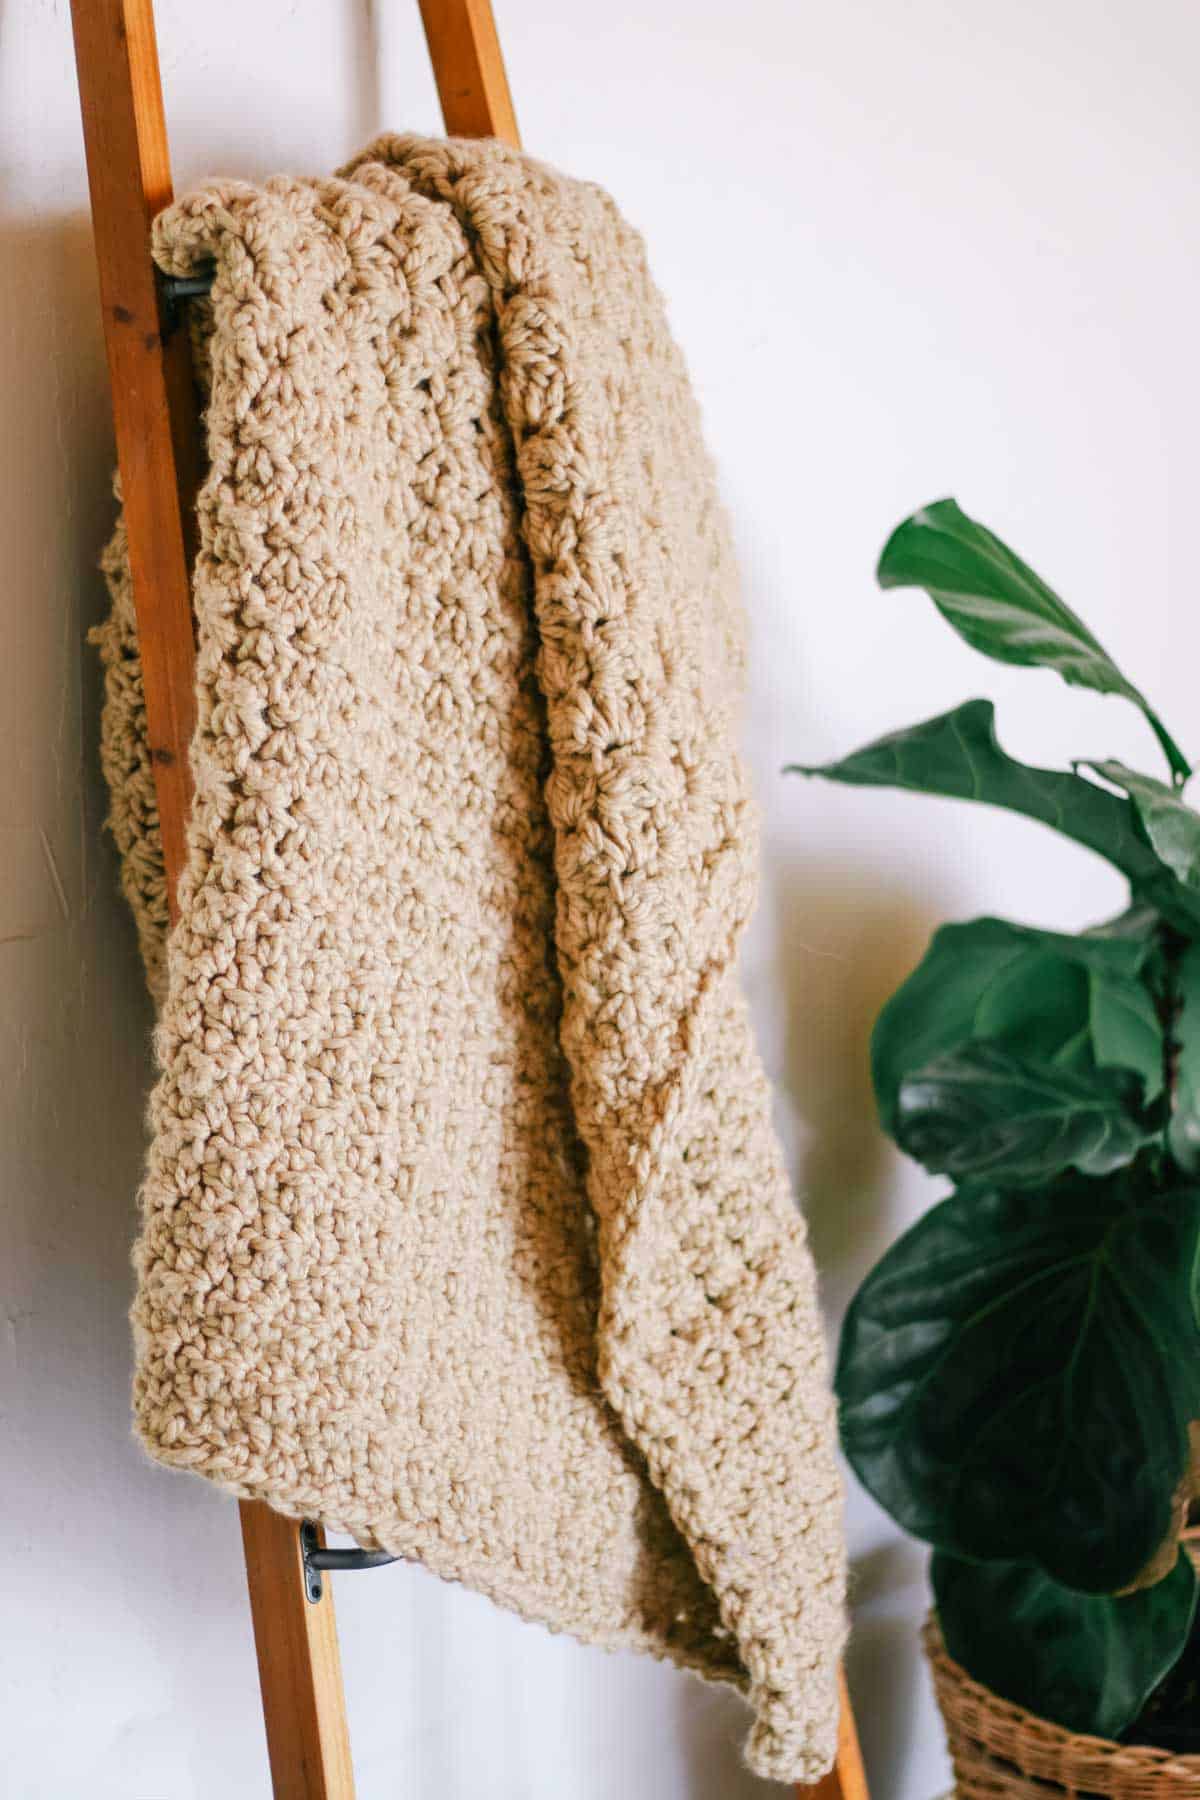 A tan-colored chunky crochet blanket draped on a blanket ladder.